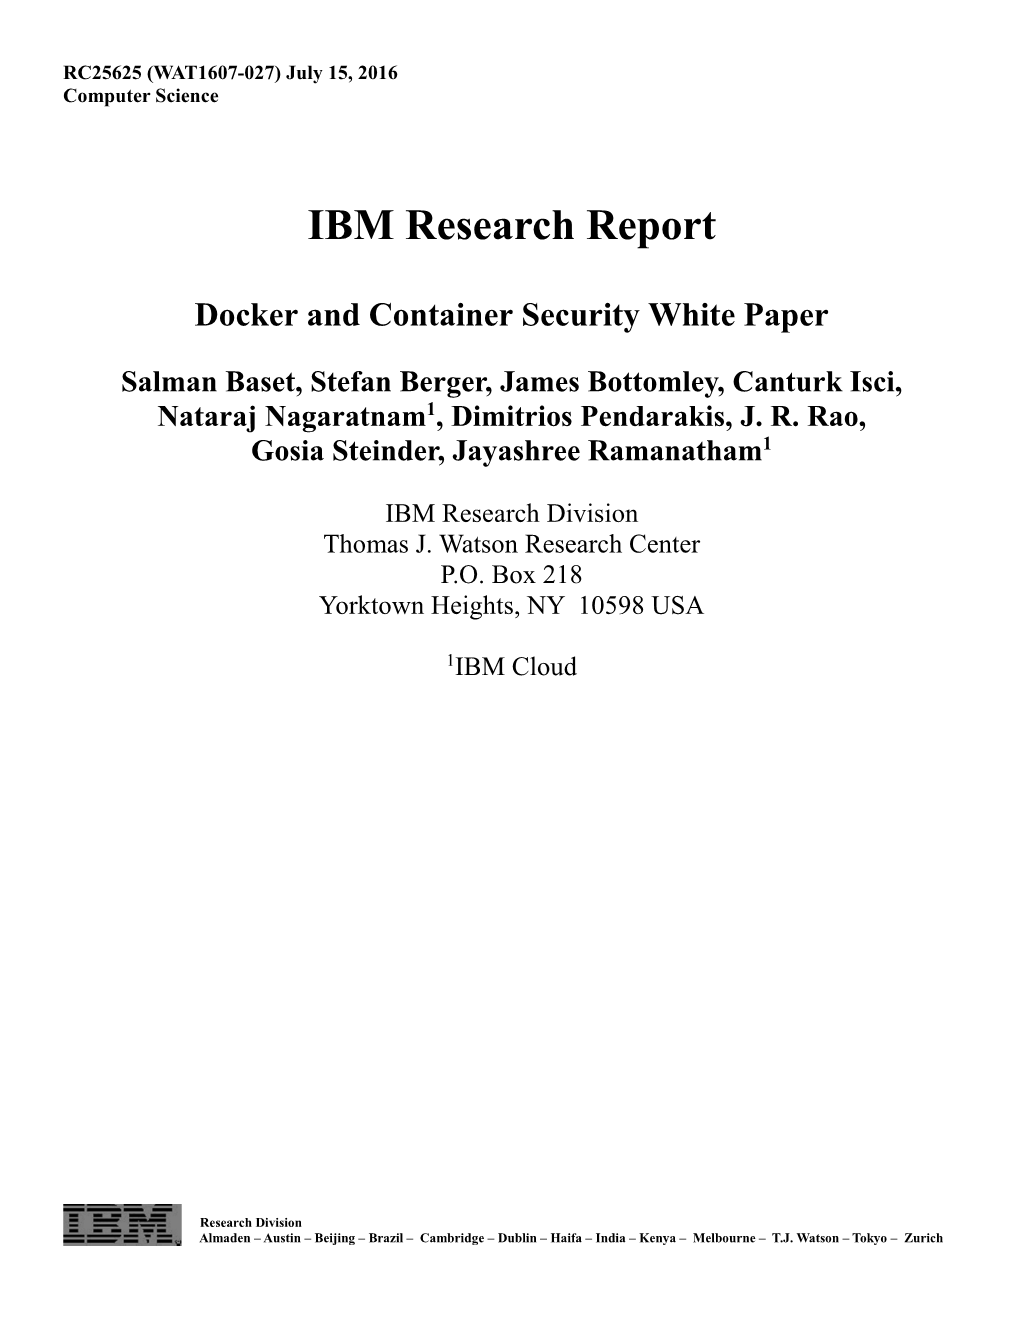 IBM Research Report Docker and Container Security White Paper